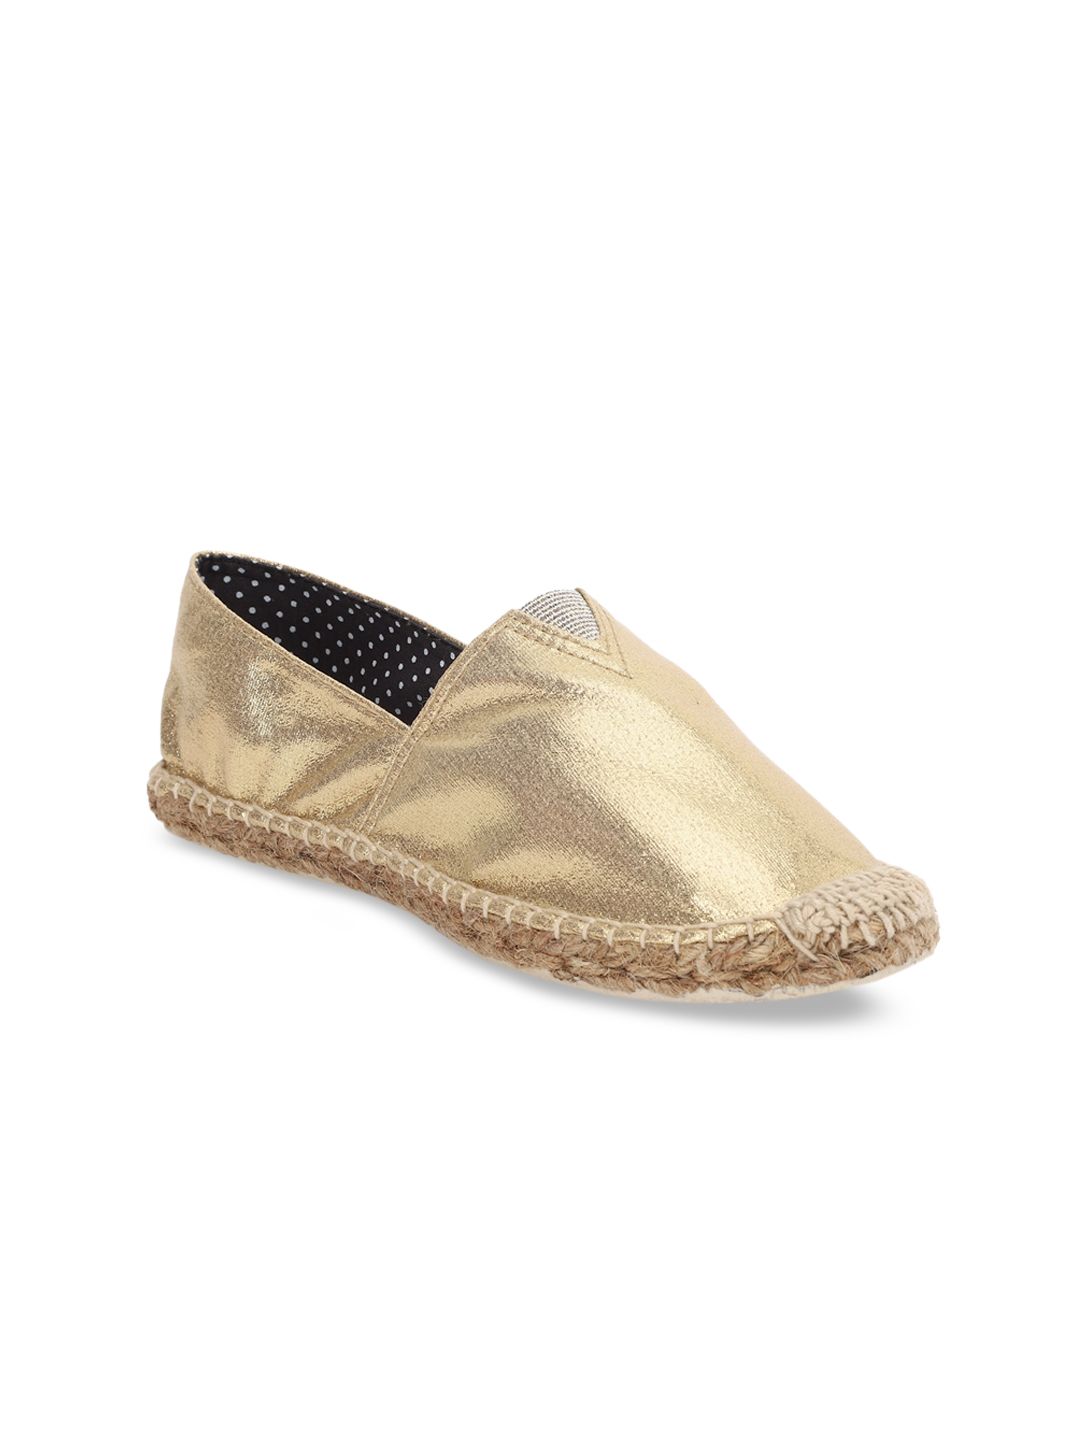 FOREVER 21 Women Gold-Toned PU Espadrilles Price in India